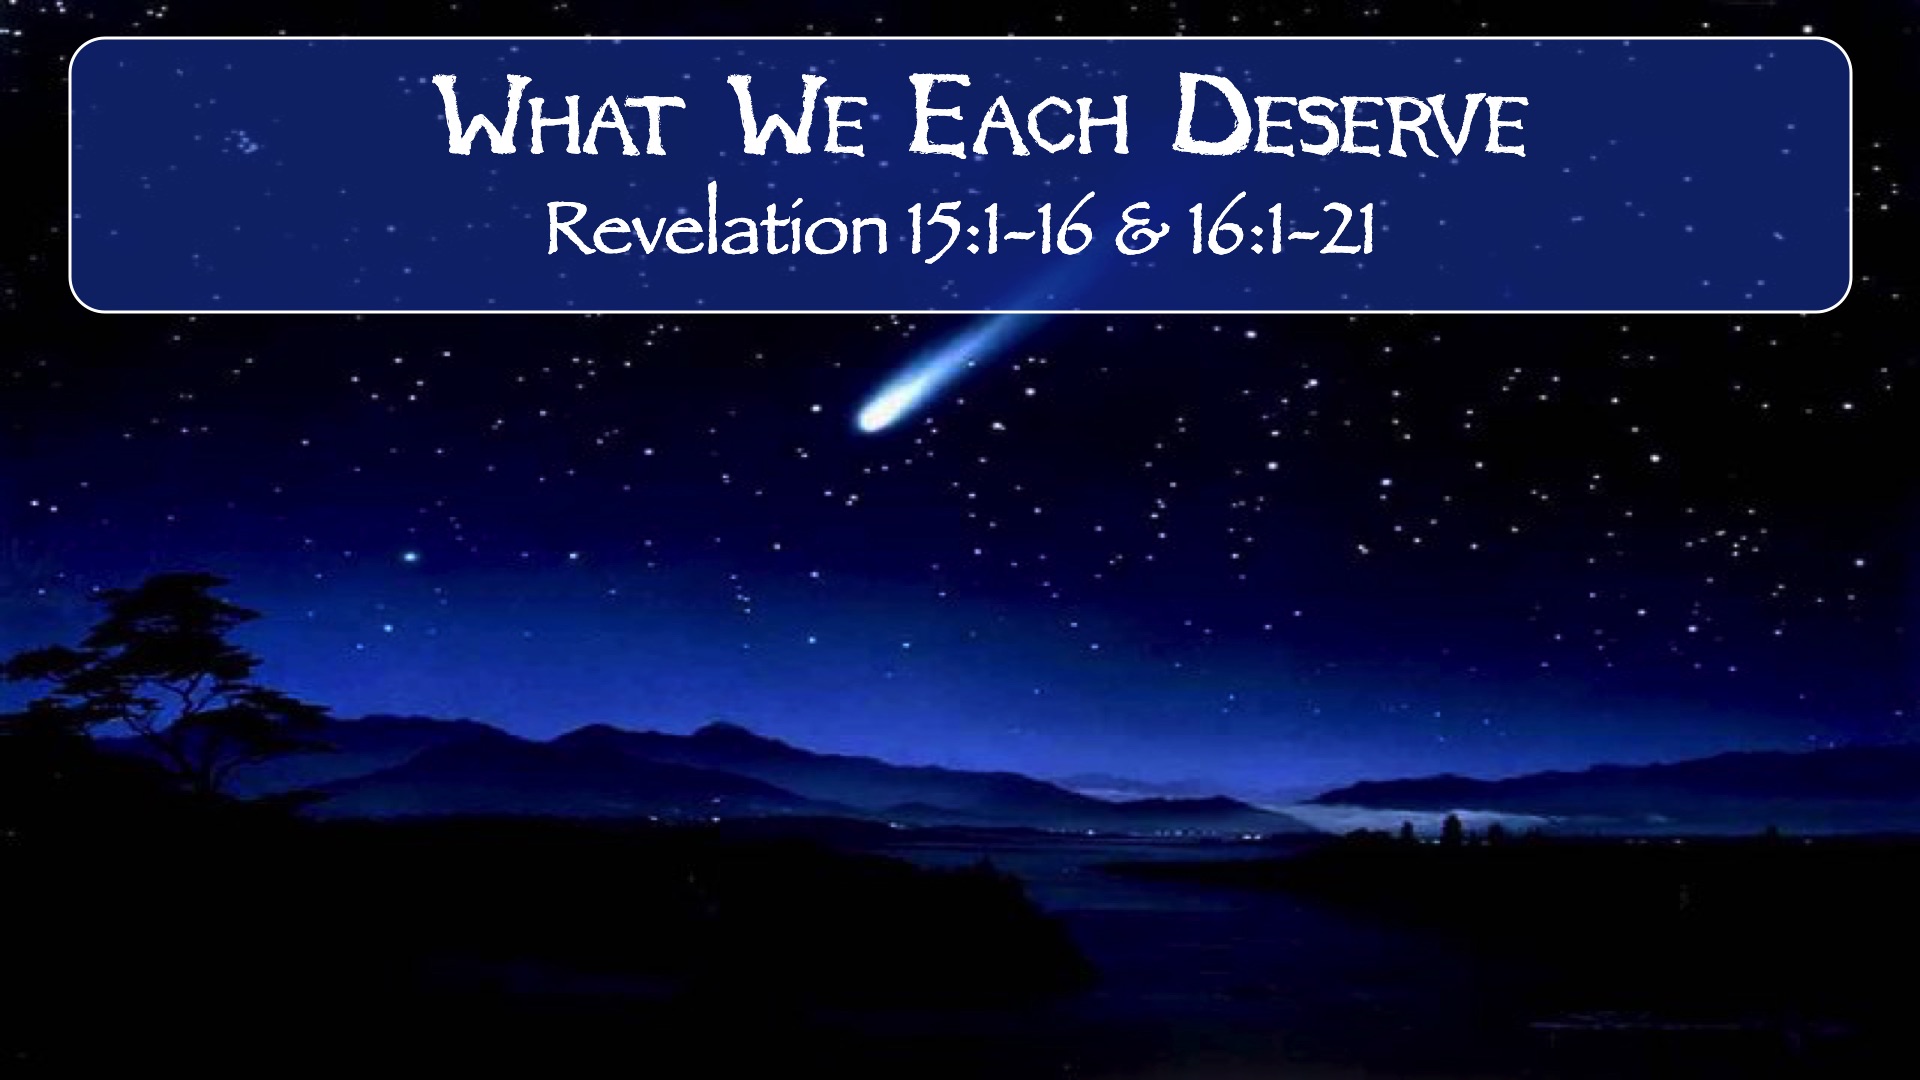 “The Book of Revelation:  What We Each Deserve”